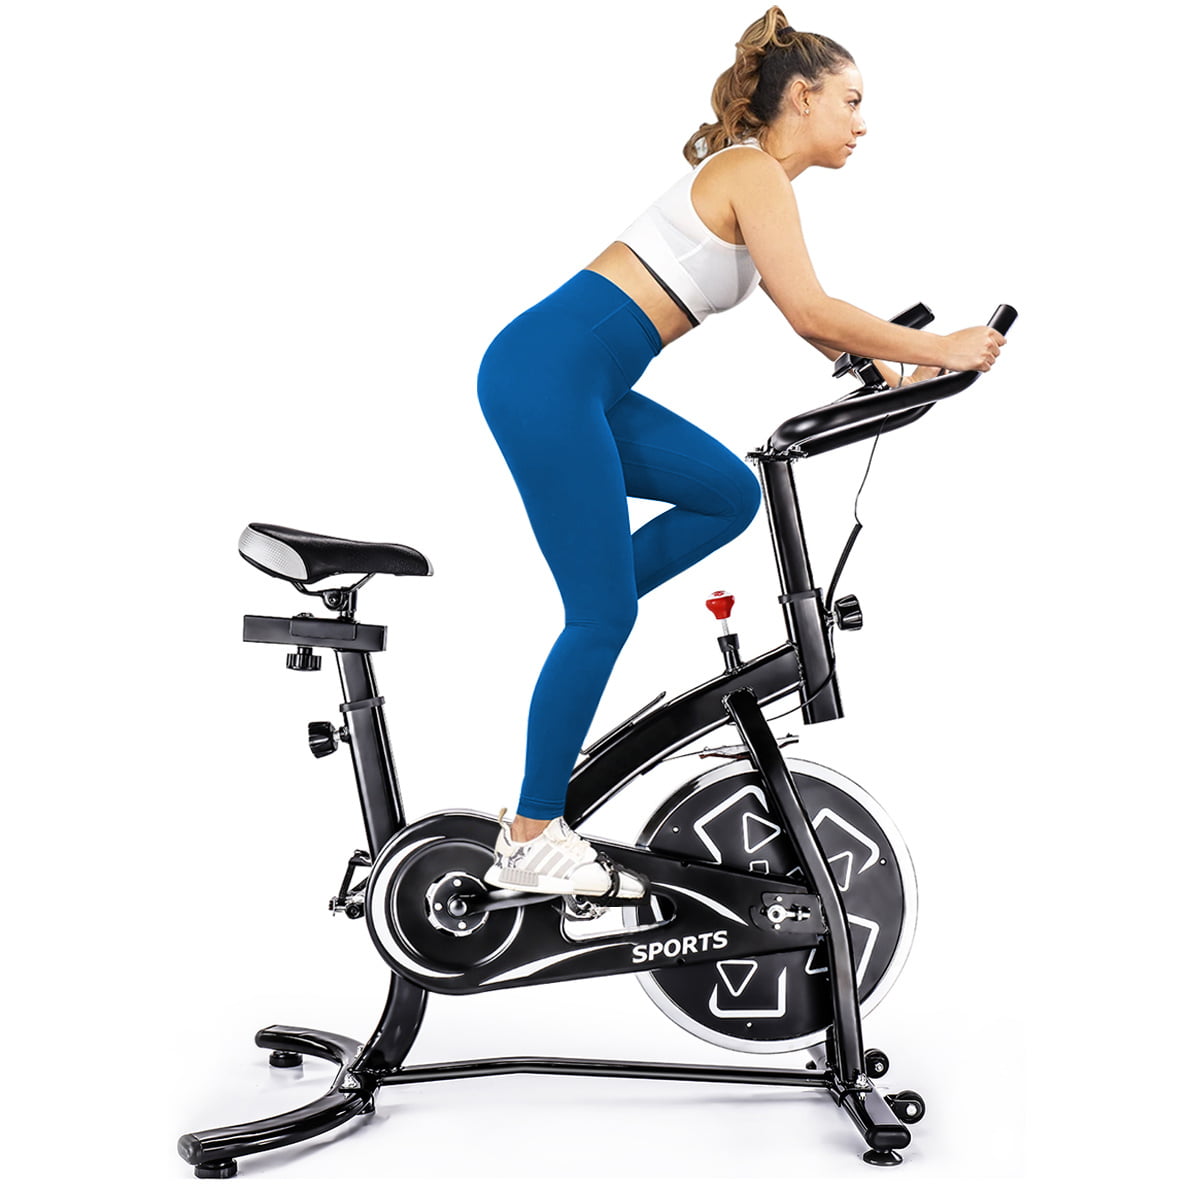 2021 upgrade Version Exercise Bike Indoor Cycling Bike Fitness Stationary GYM 